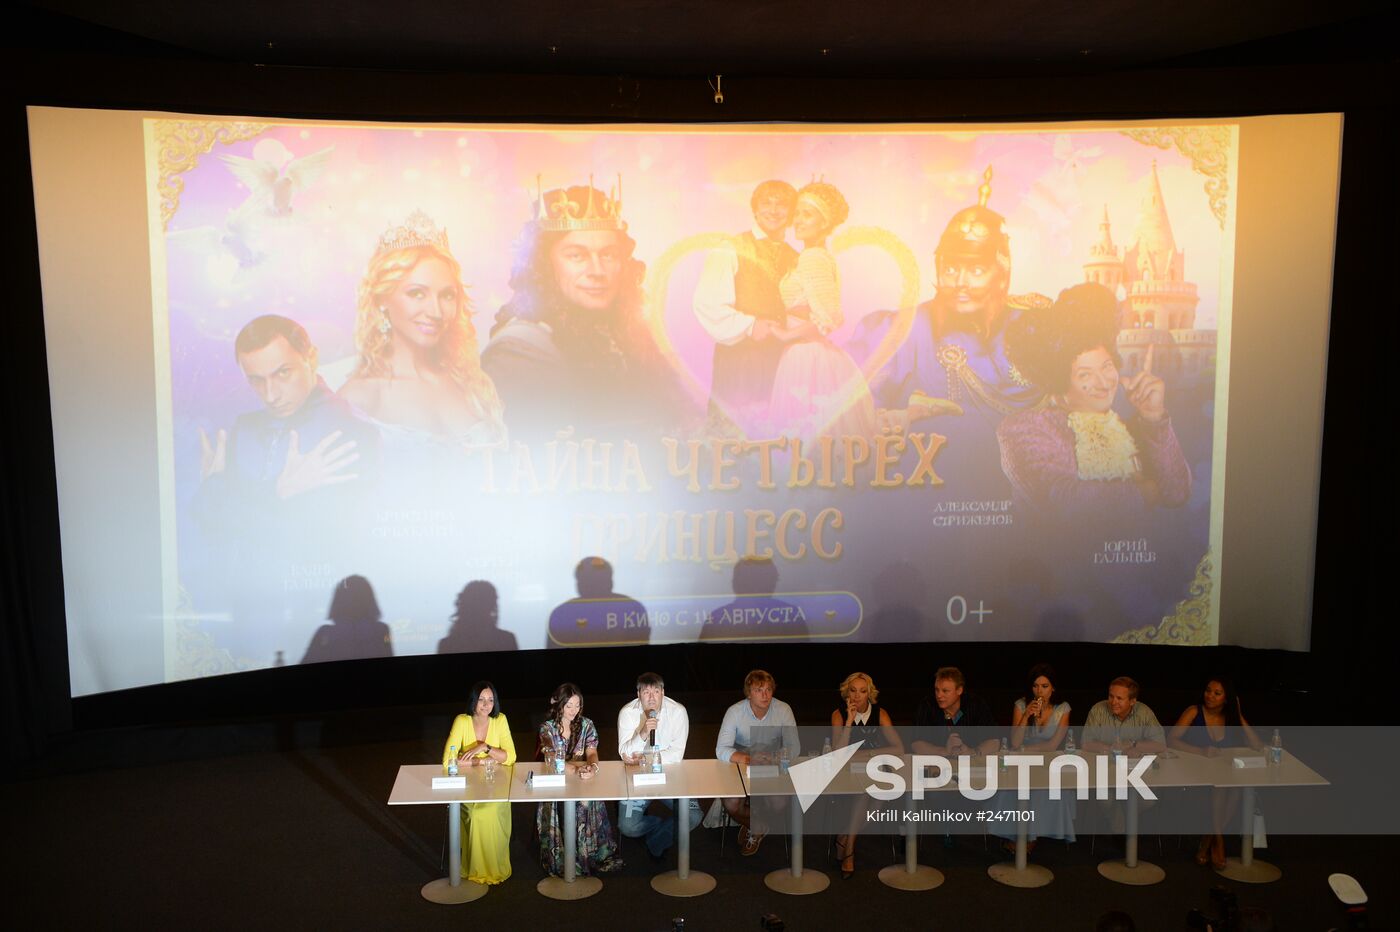 Actors of fairy tale movie "The Mystery of the Four Princesses" hold news conference